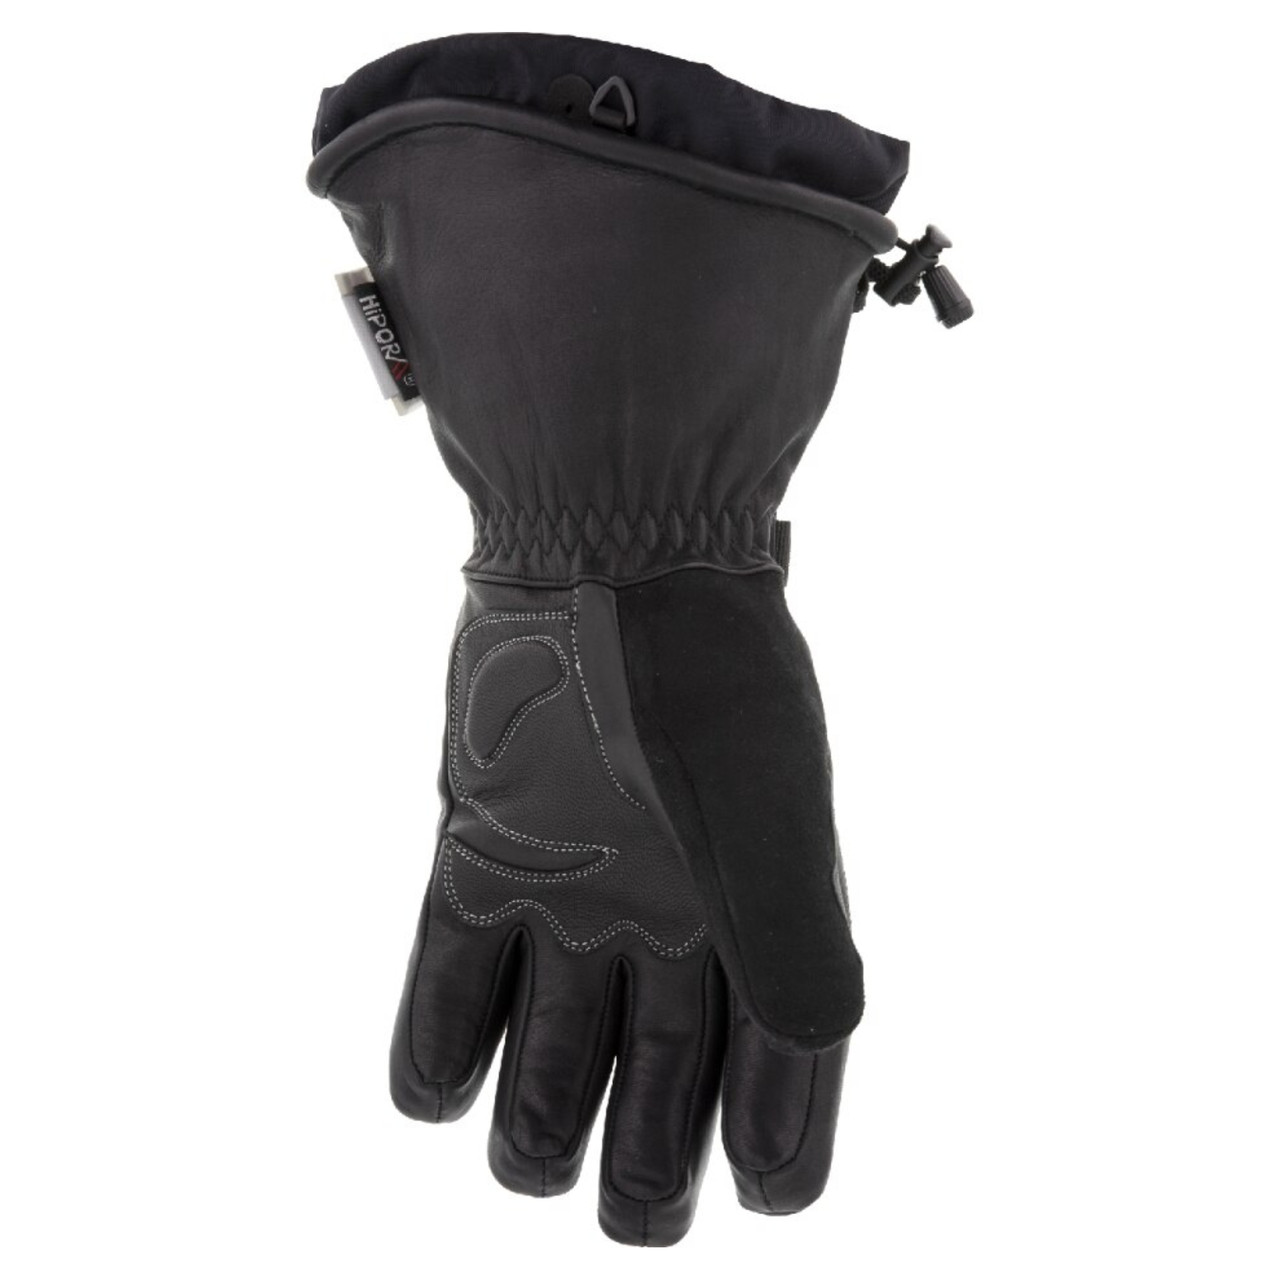 Yamaha New OEM Leather Gauntlet Glove by FXR, X-Large, 180-80314-00-16